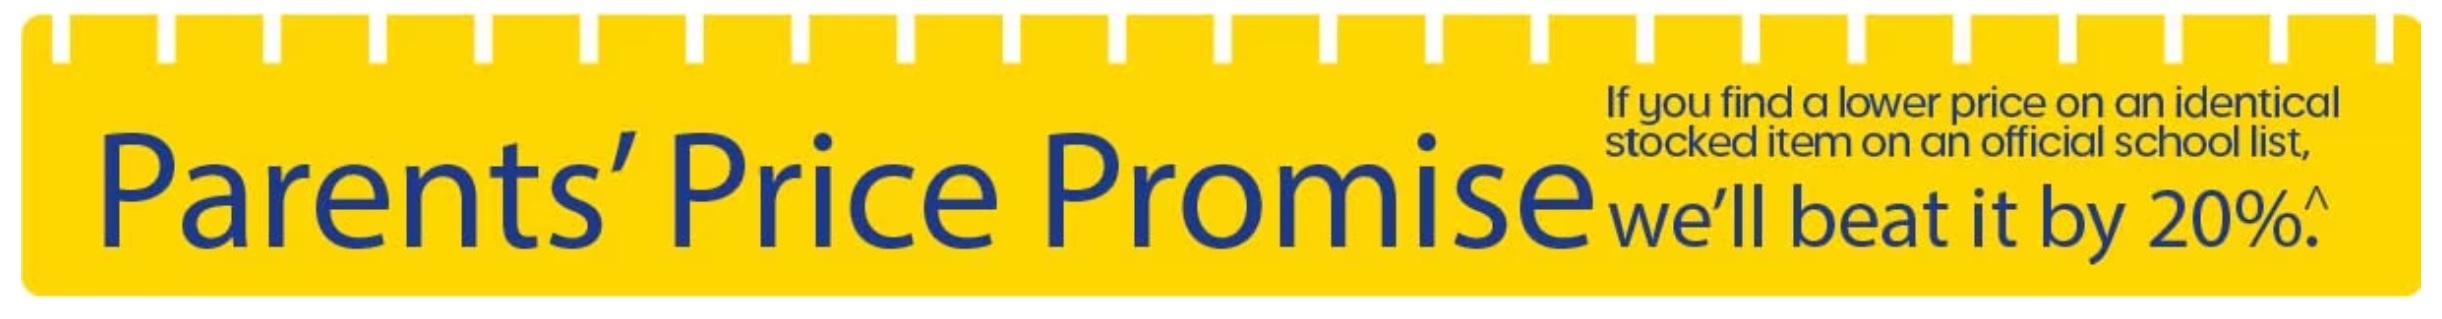 officeworks parents price promise and price match